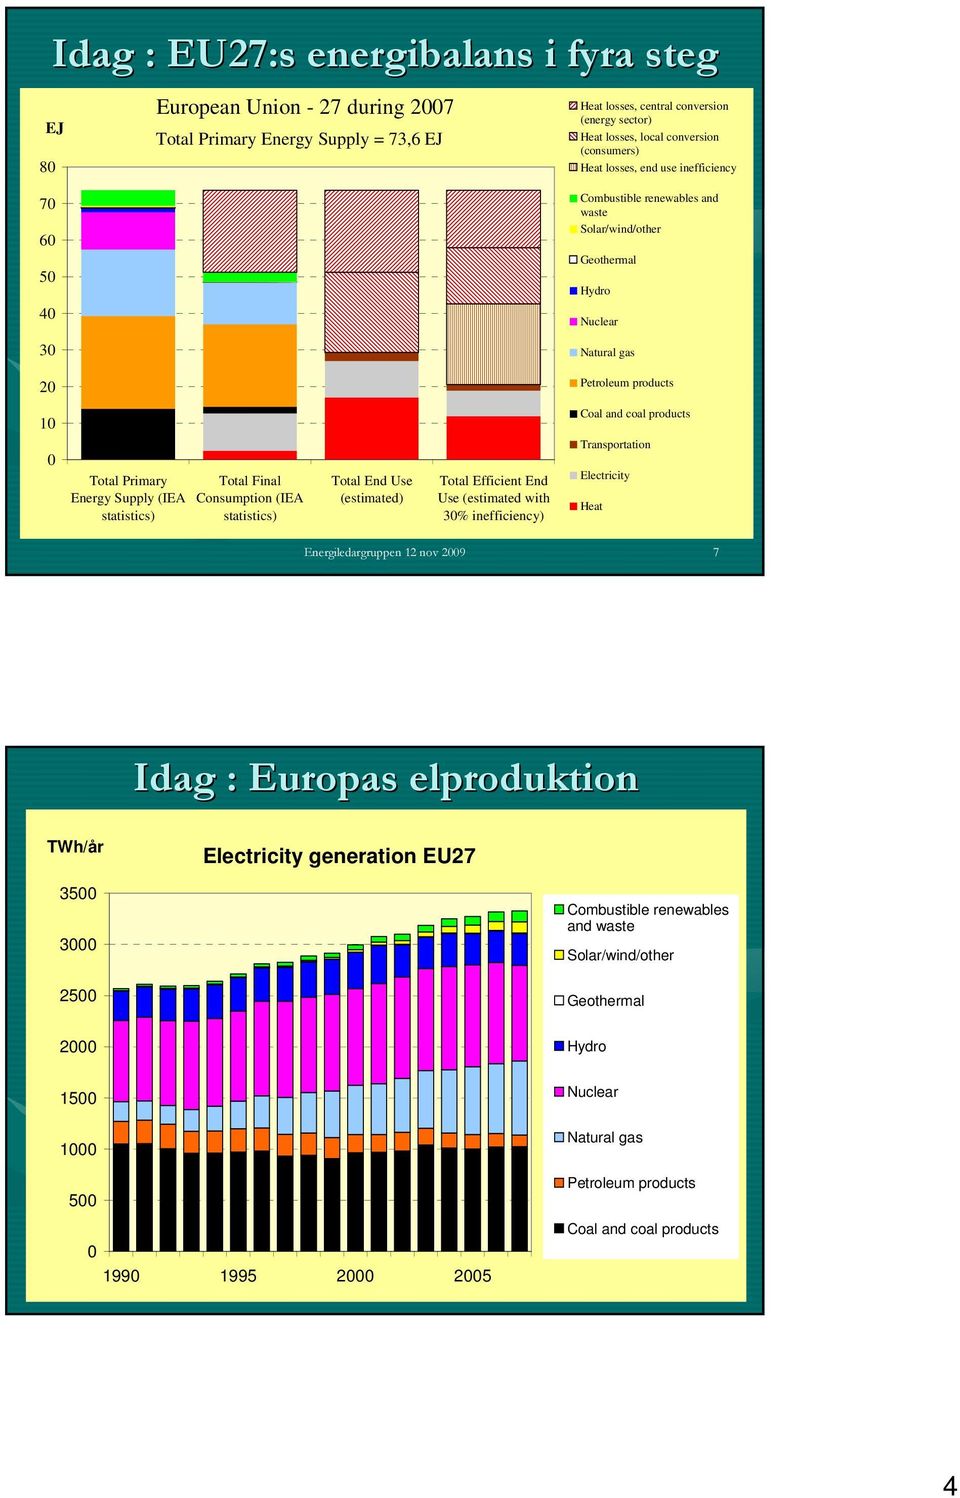 Primary Energy Supply (IEA statistics) Total Final Consumption (IEA statistics) Total End Use (estimated) Total Efficient End Use (estimated with 3% inefficiency) Transportation Electricity Heat